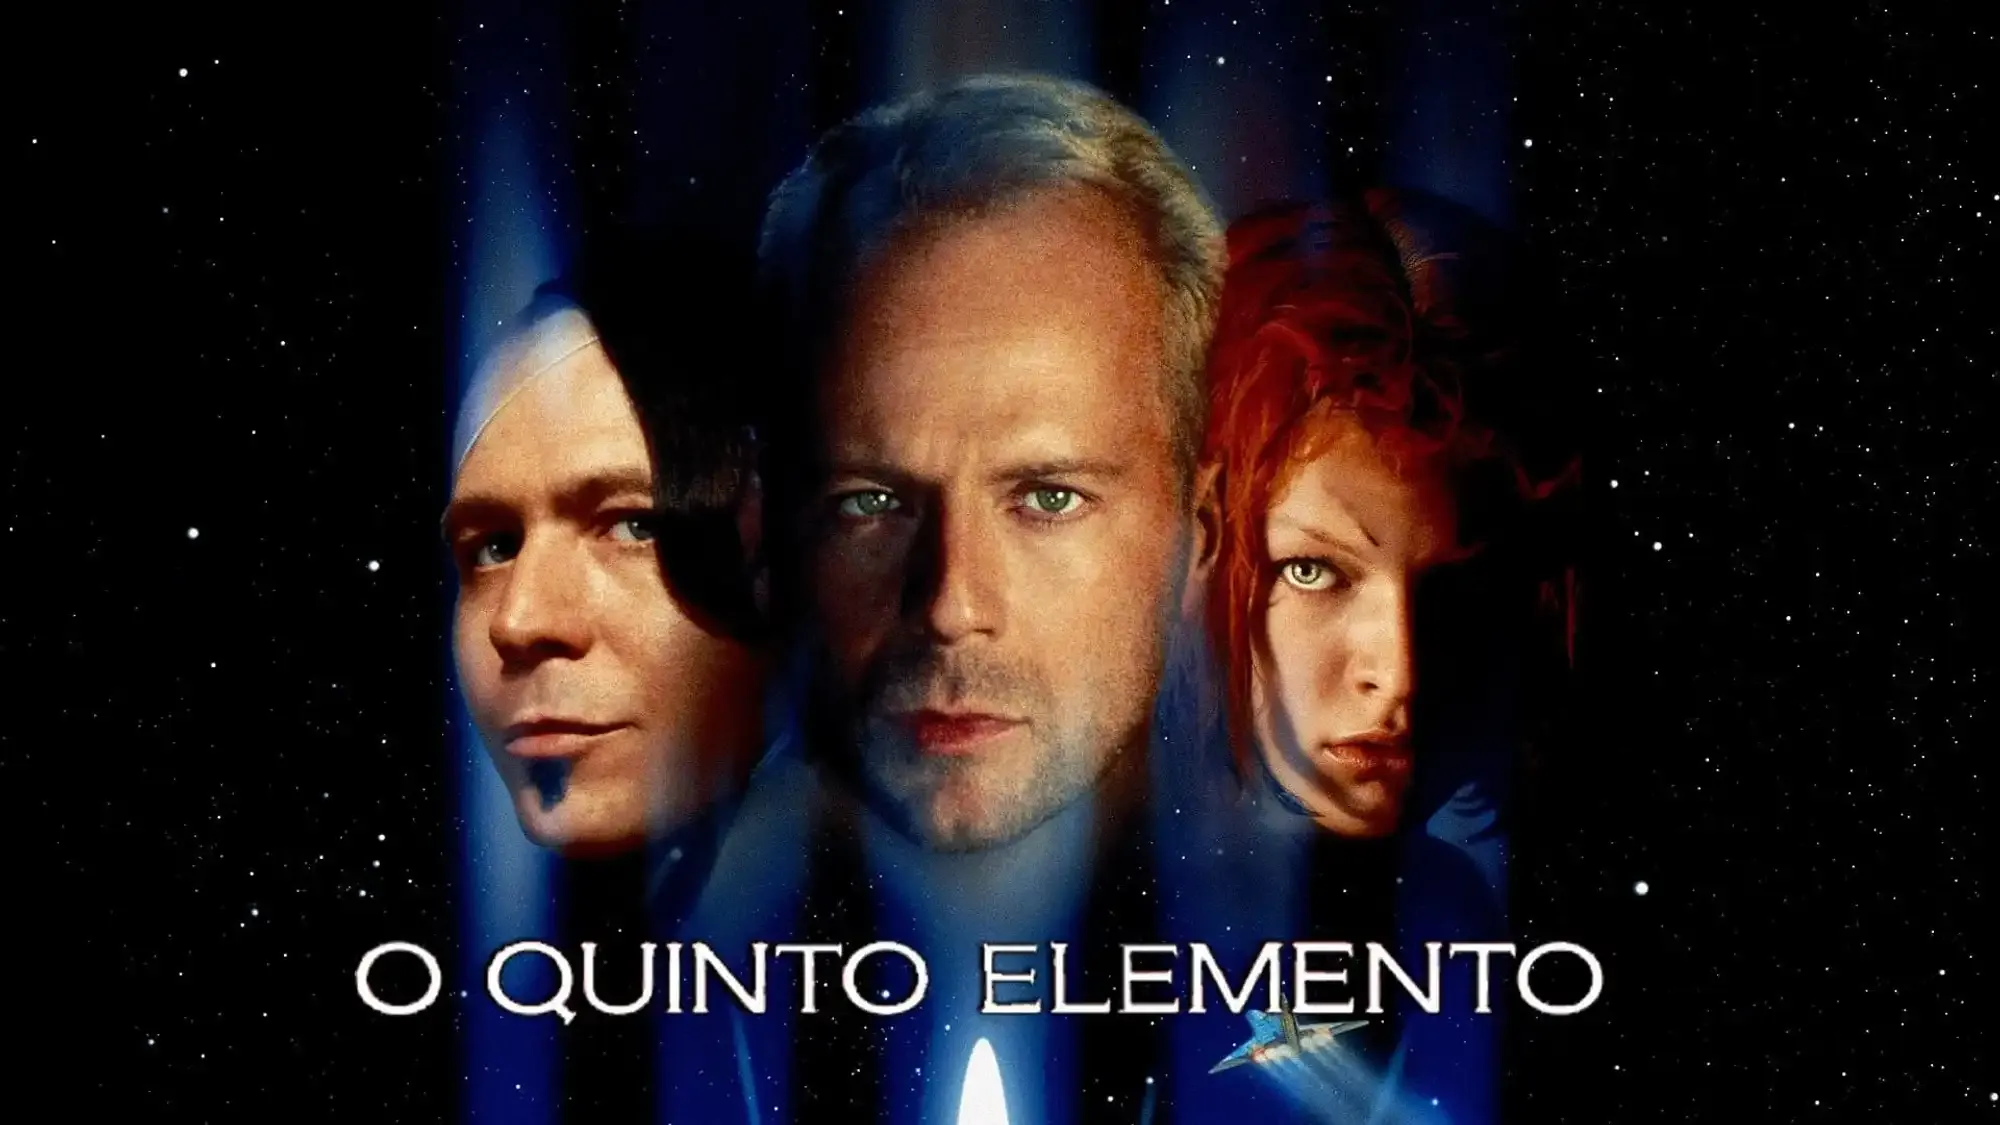 The Fifth Element movie review